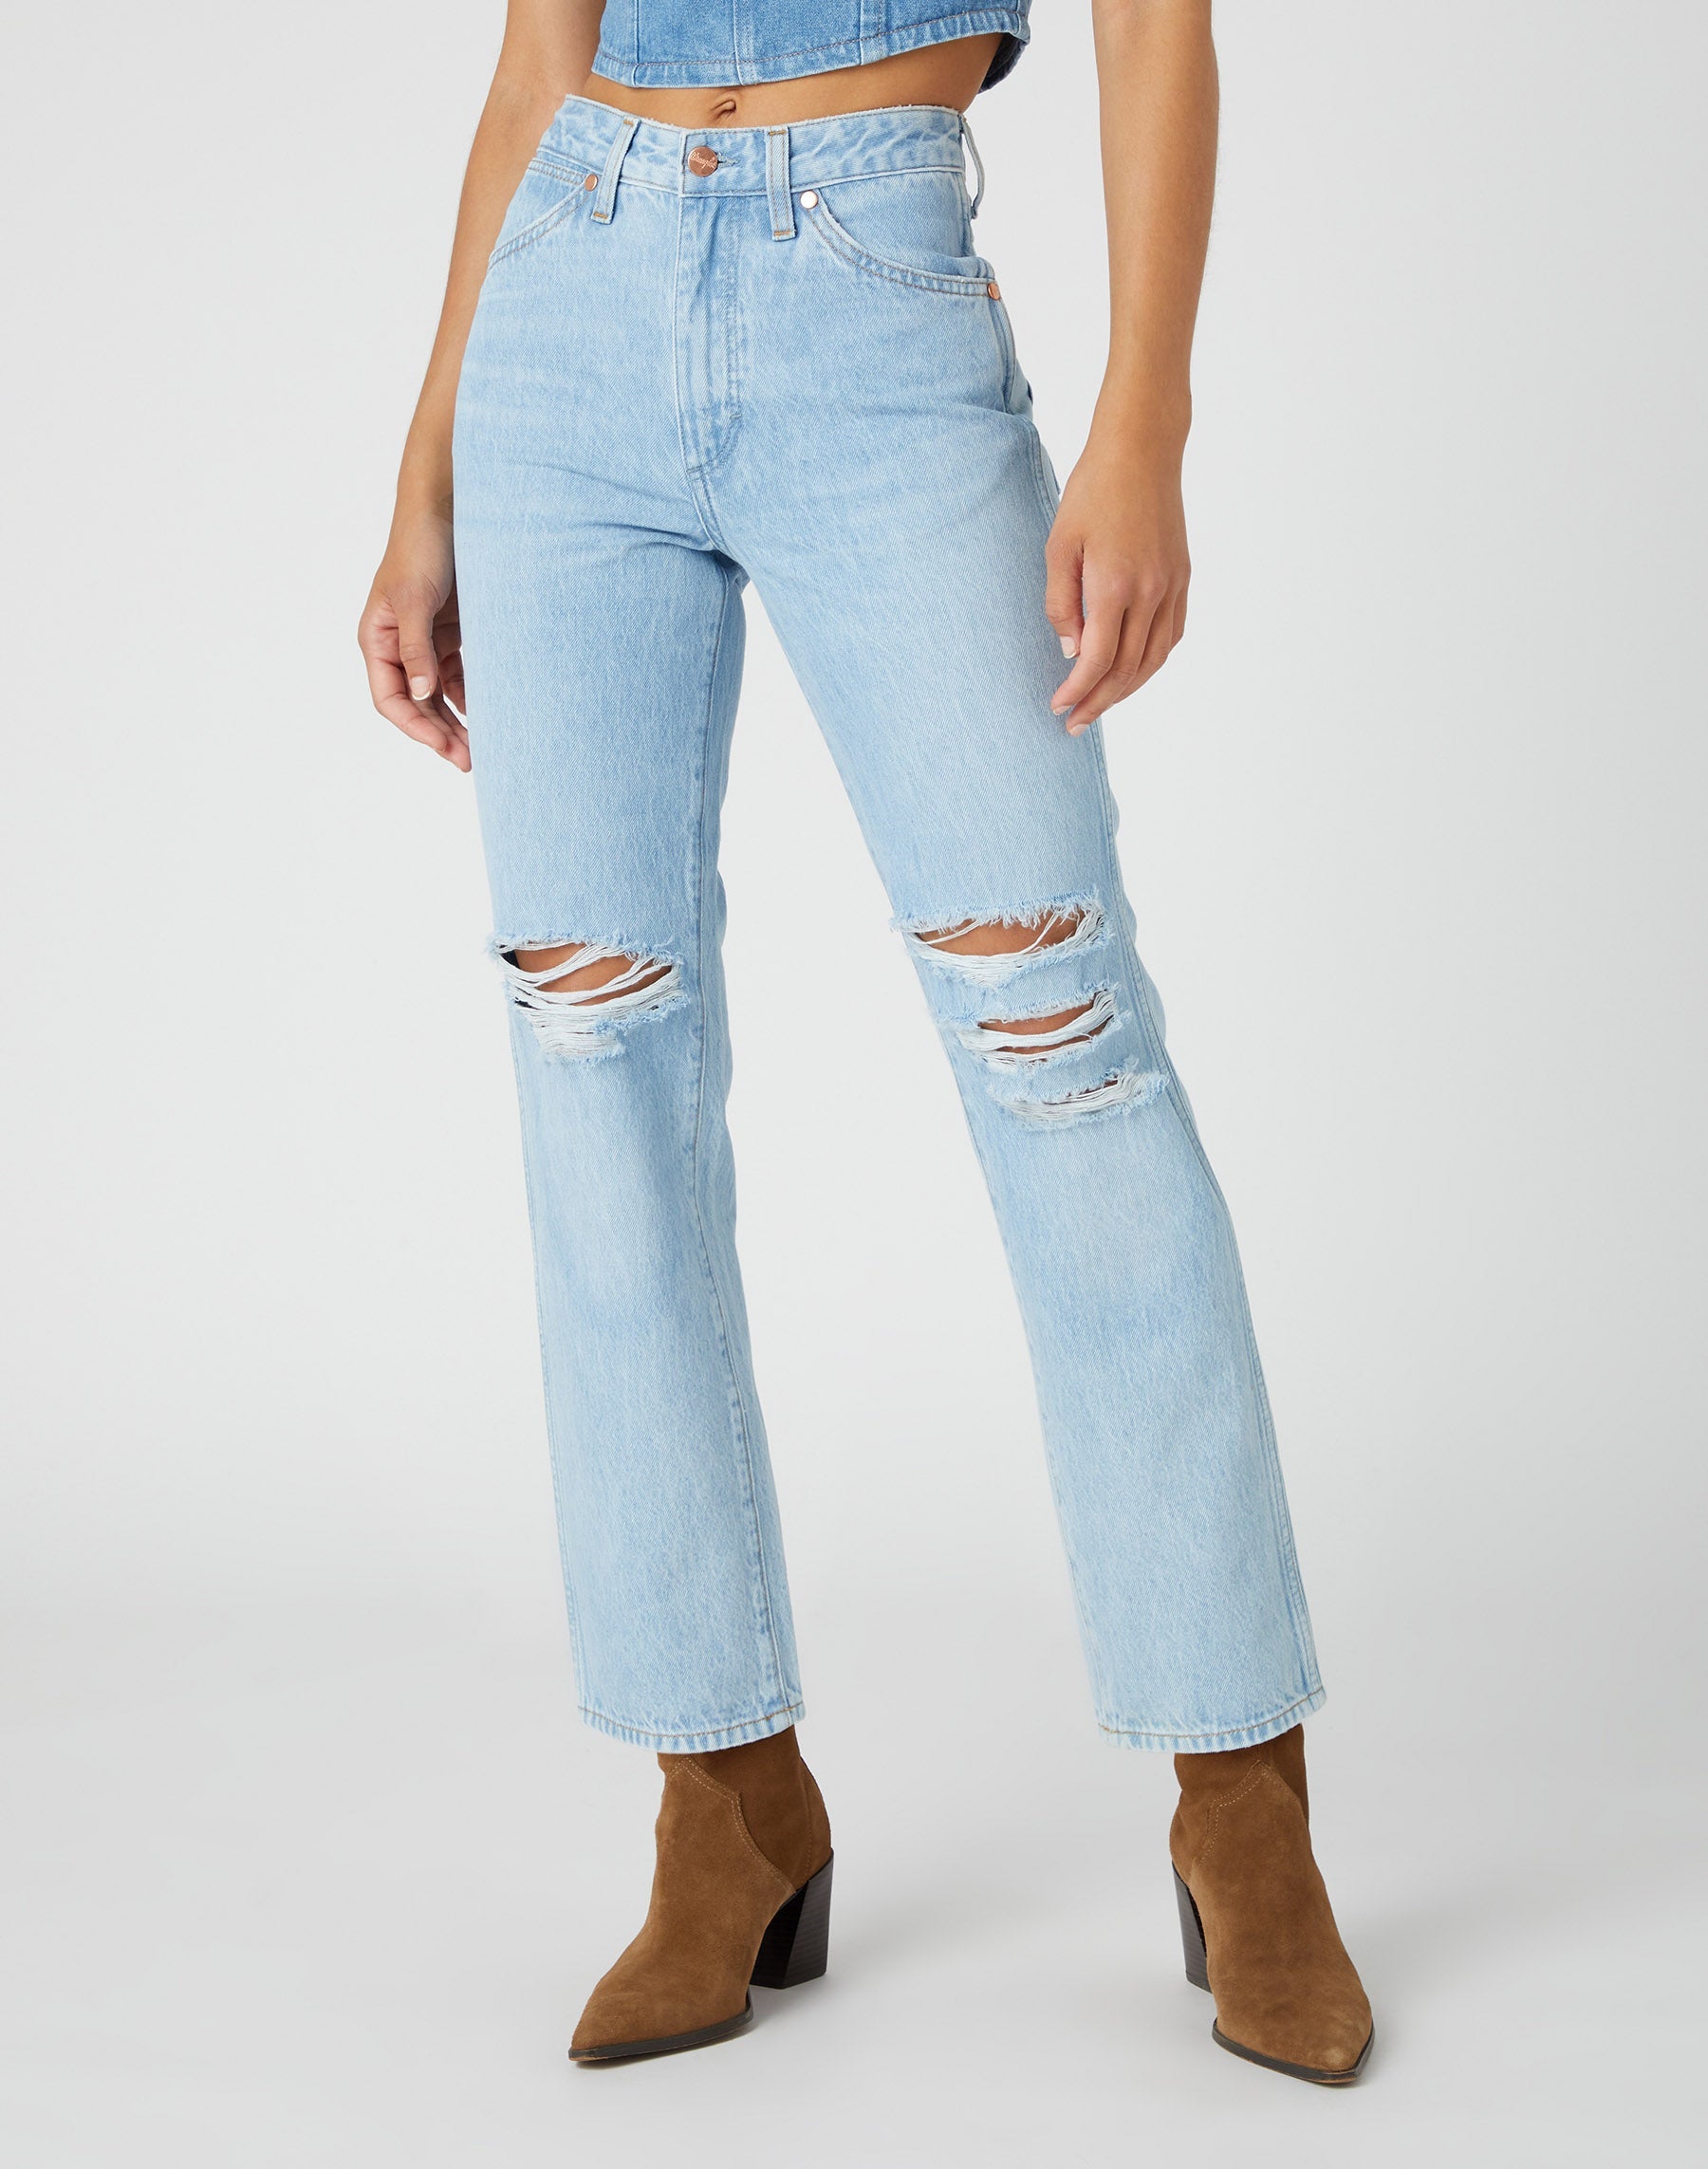 Wild West in Bad Intentions Jeans Wrangler   